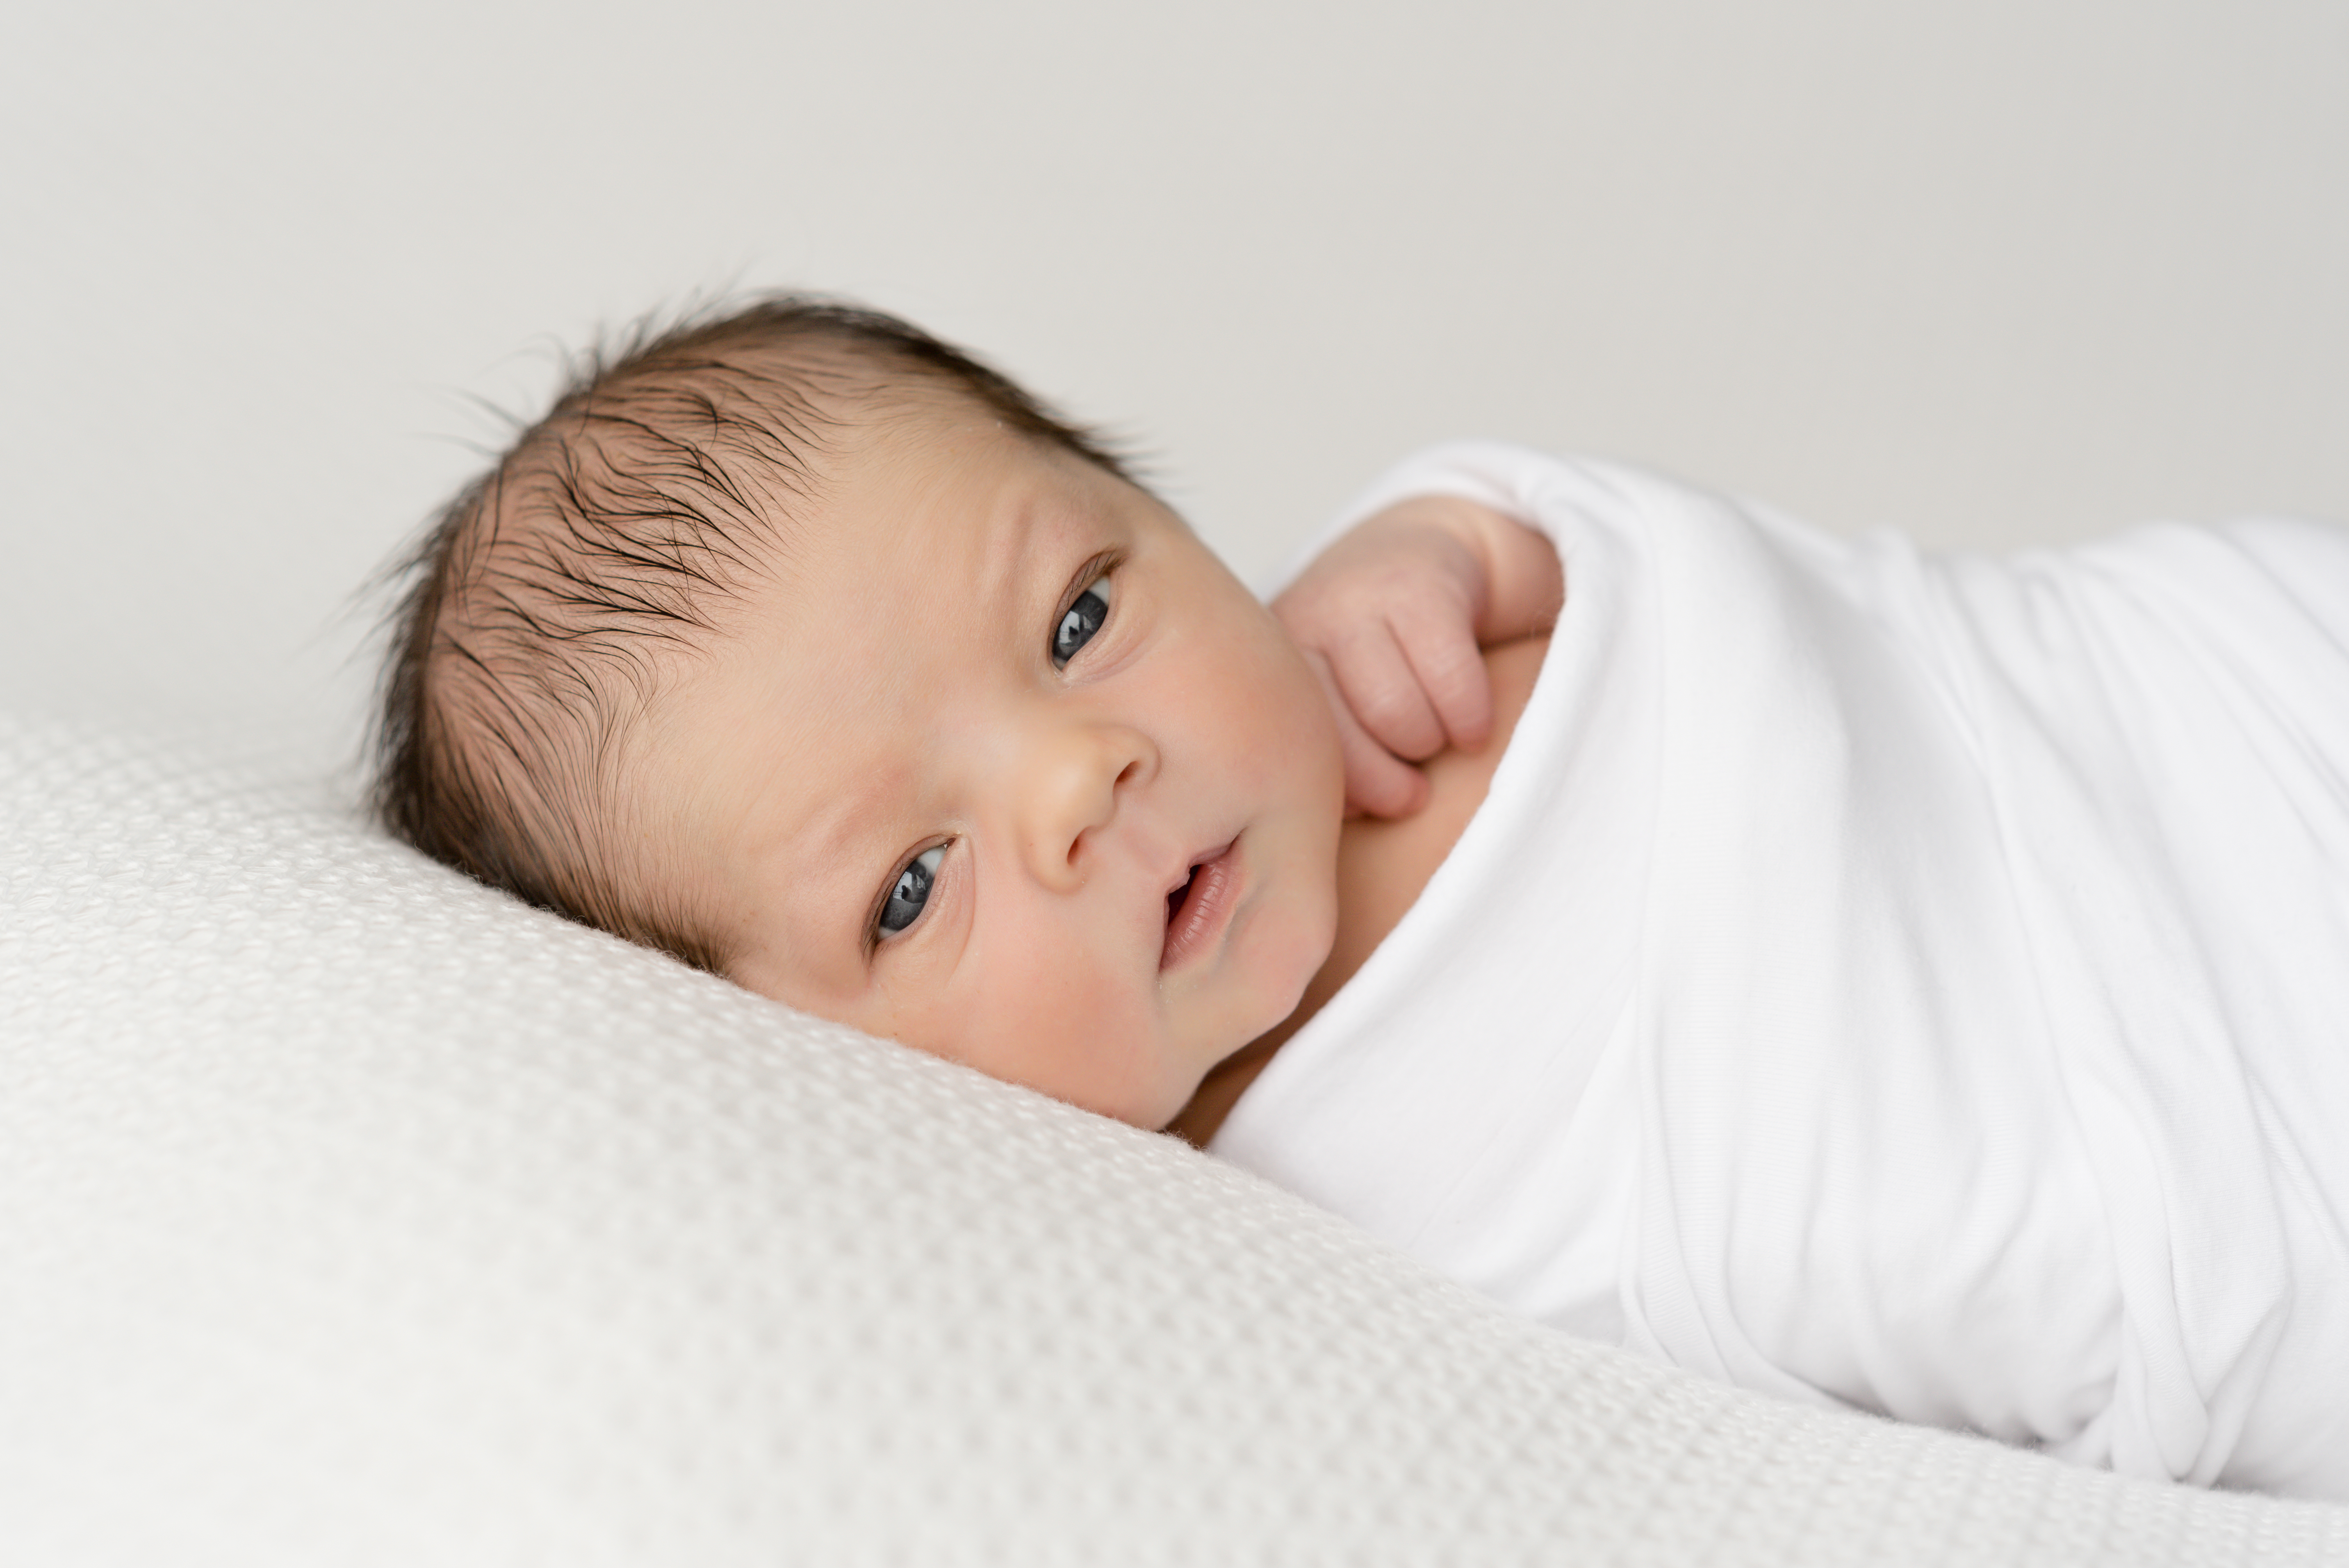 In home newborn photography baby boy wrapped in white